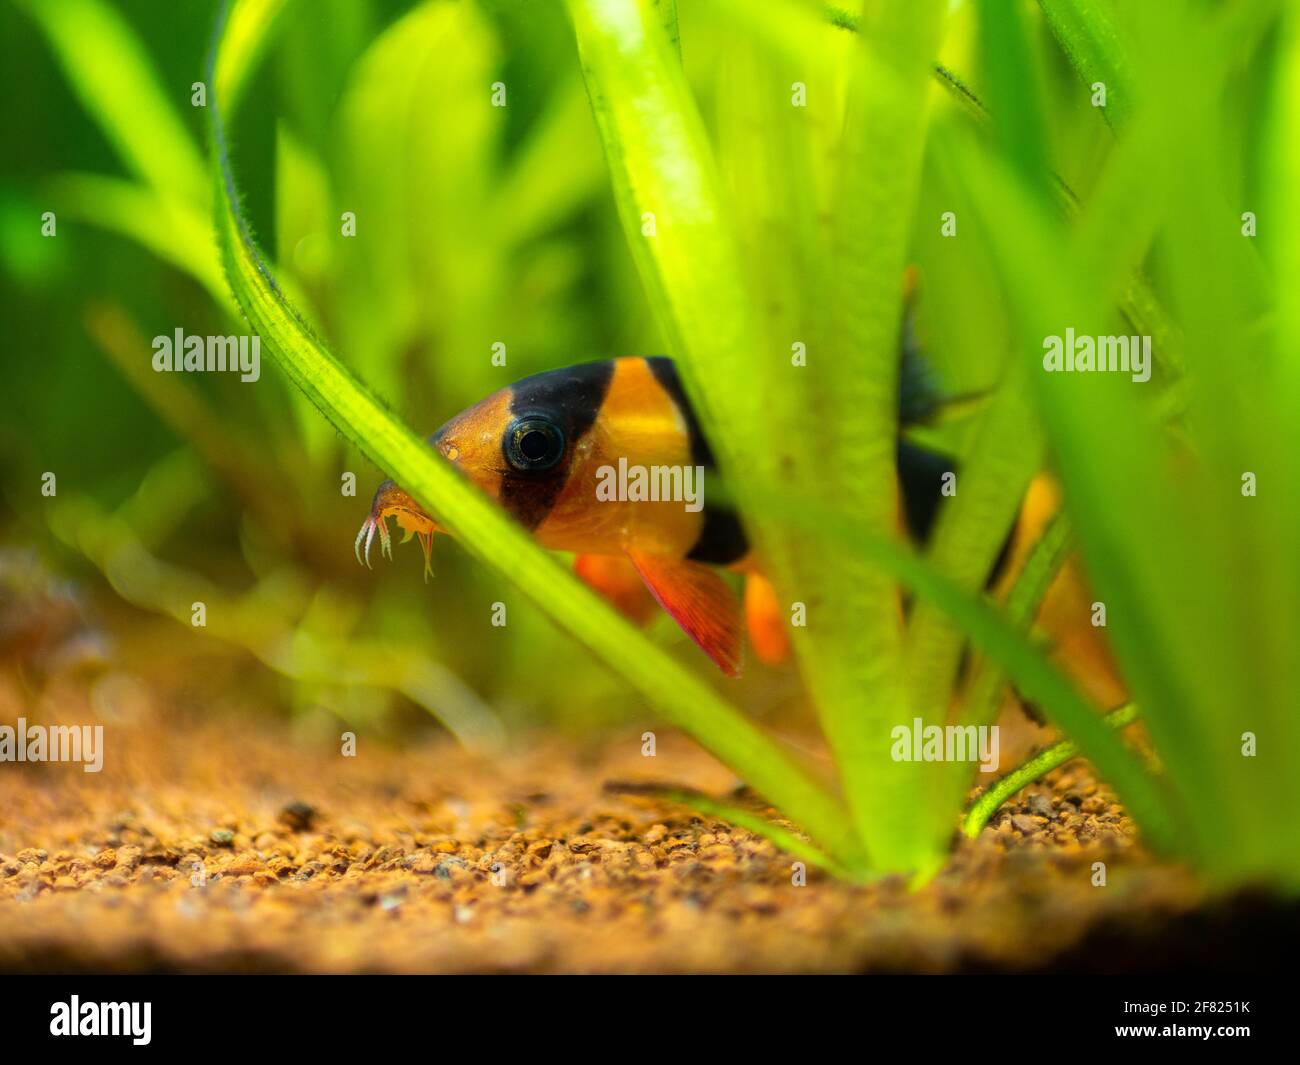 Large clown loach (Chromobotia macracanthus) hidden among the plants in a fish tank with blurred background Stock Photo